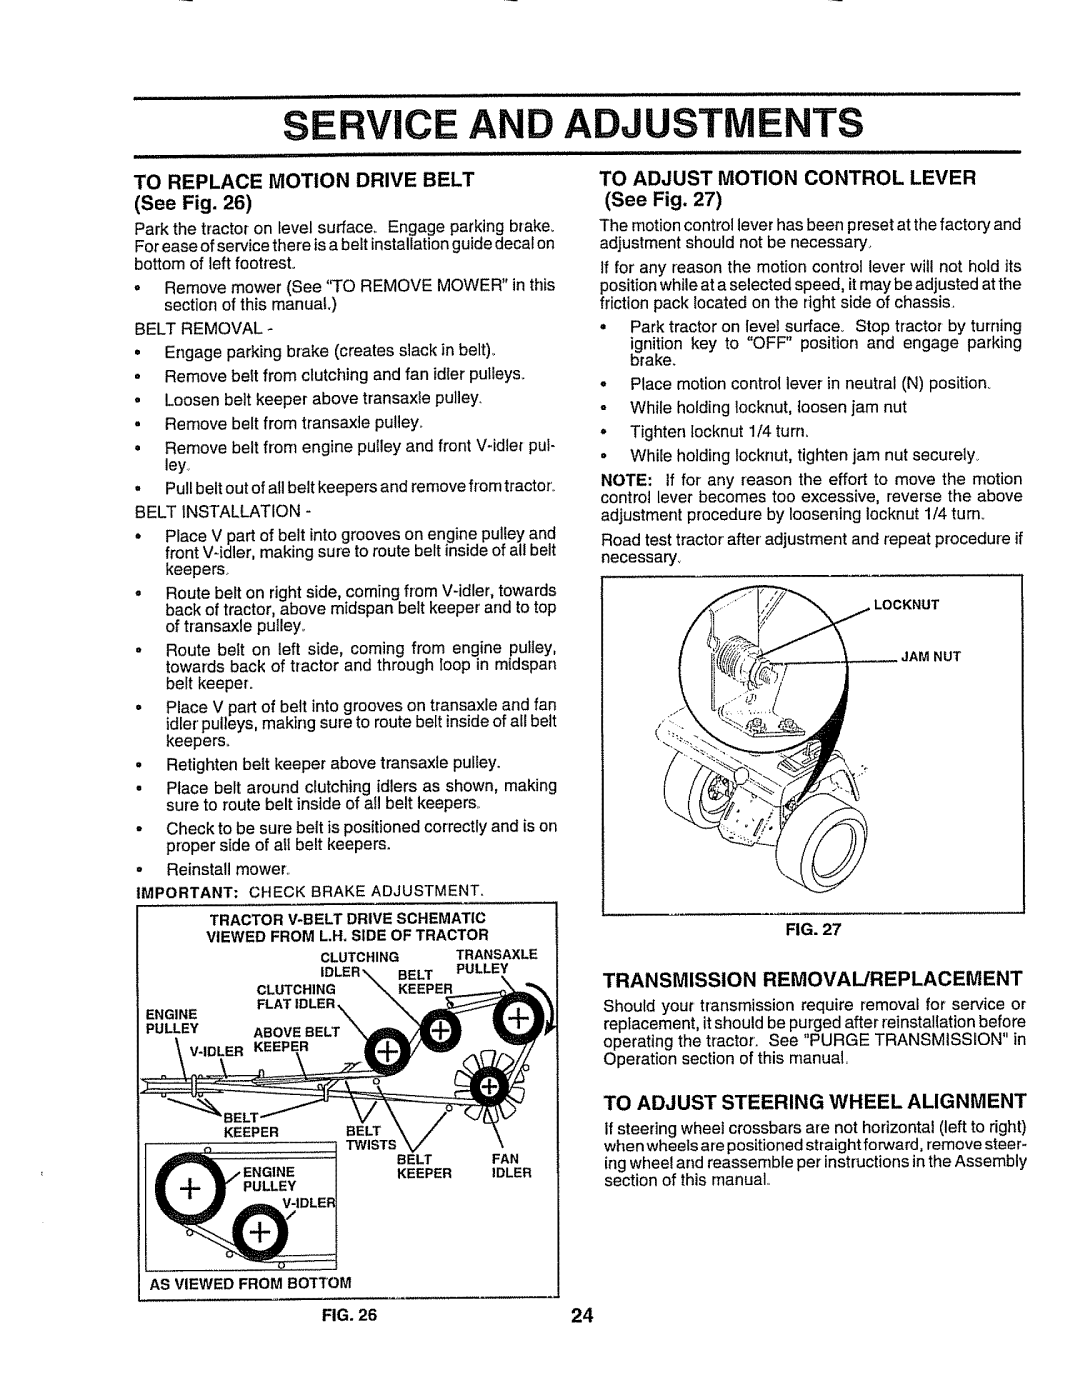 Craftsman 917.258911 Service And Adju, TO ADJUST MOTION CONTROL LEVER See Fig, Transmission Removal/Replacement 